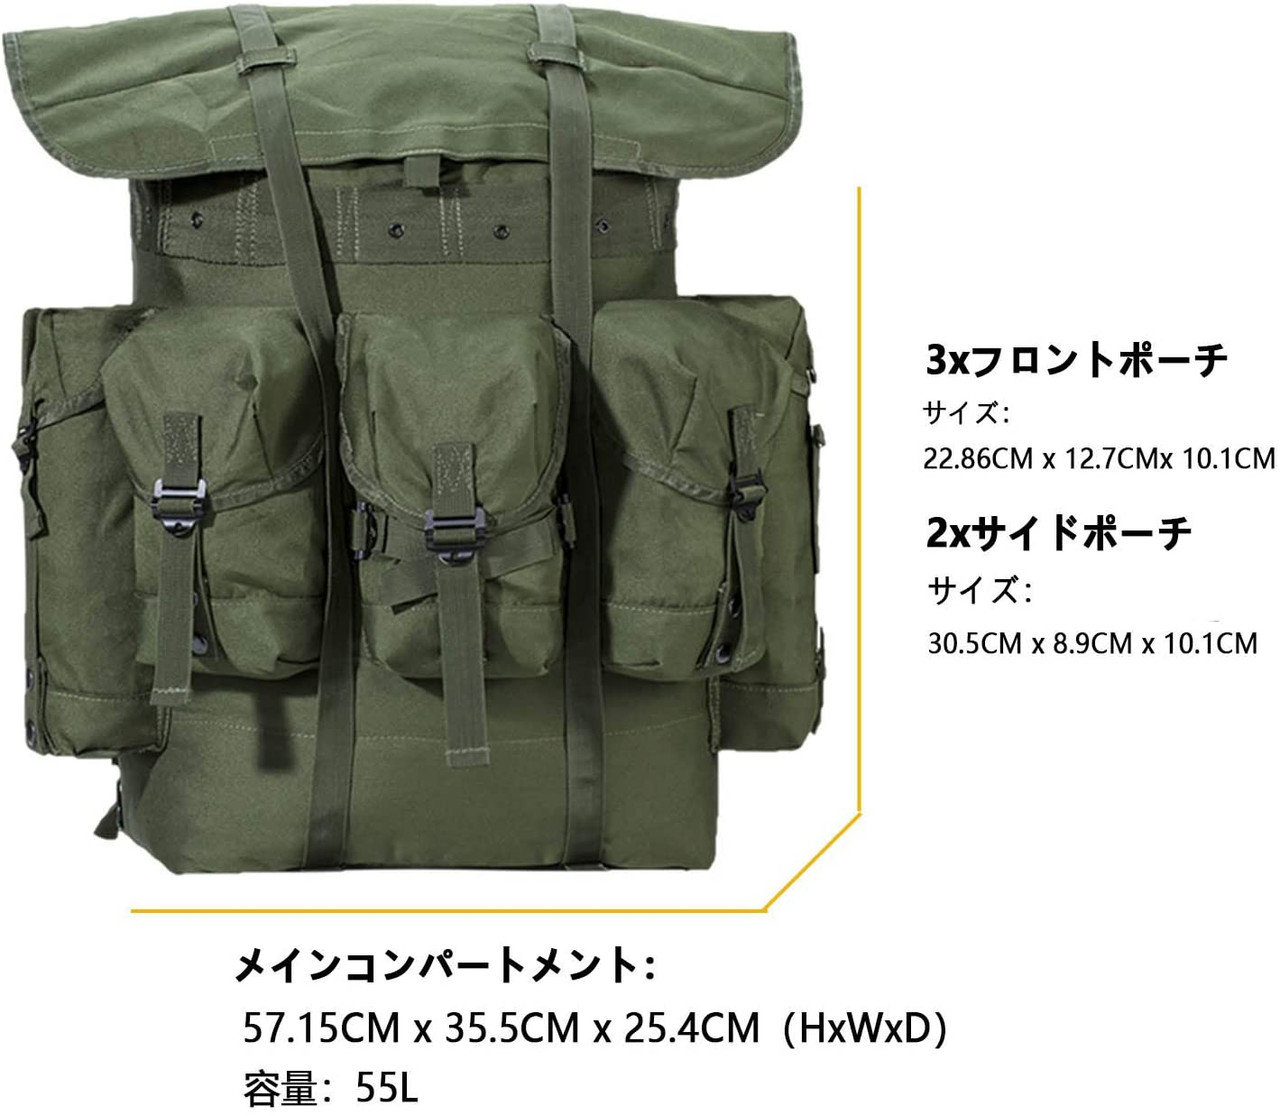 Akmax.cn military surplus rucksack army survival combat field A.L.I.C.E. backpack with suspender strap and frame olive drab